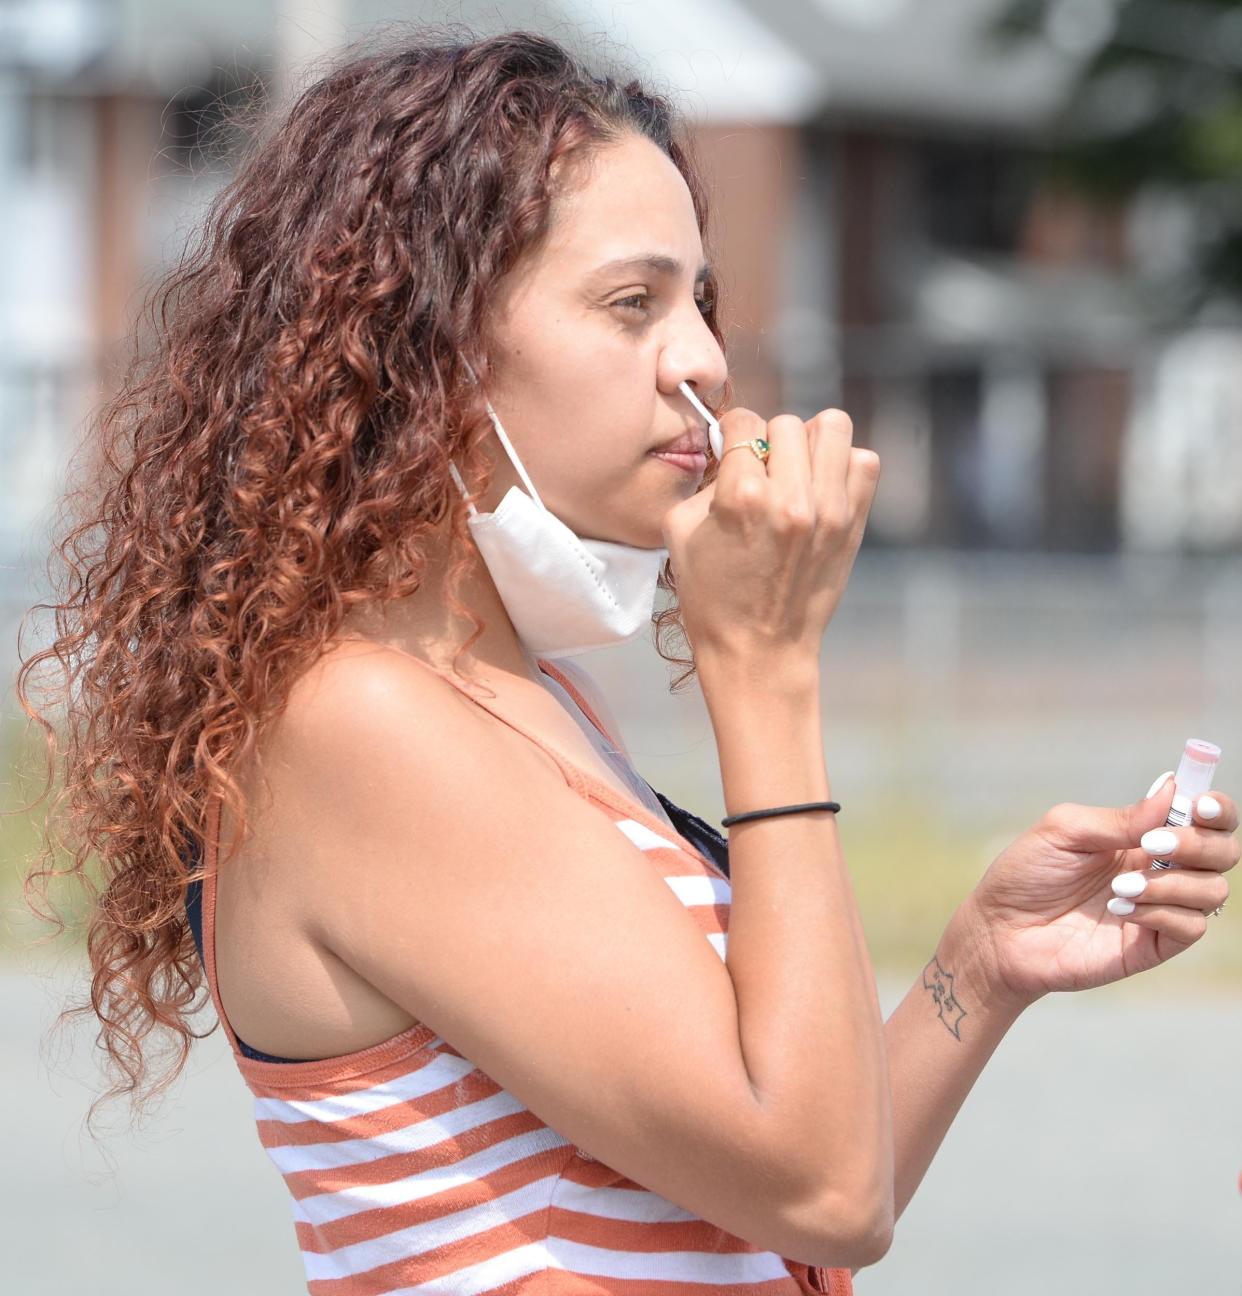 Yaritza Higgns, 27, takes a coronavirus self-test at the free, walk-up testing site at the Crescent Court public housing complex in Brockton, Massachusetts.